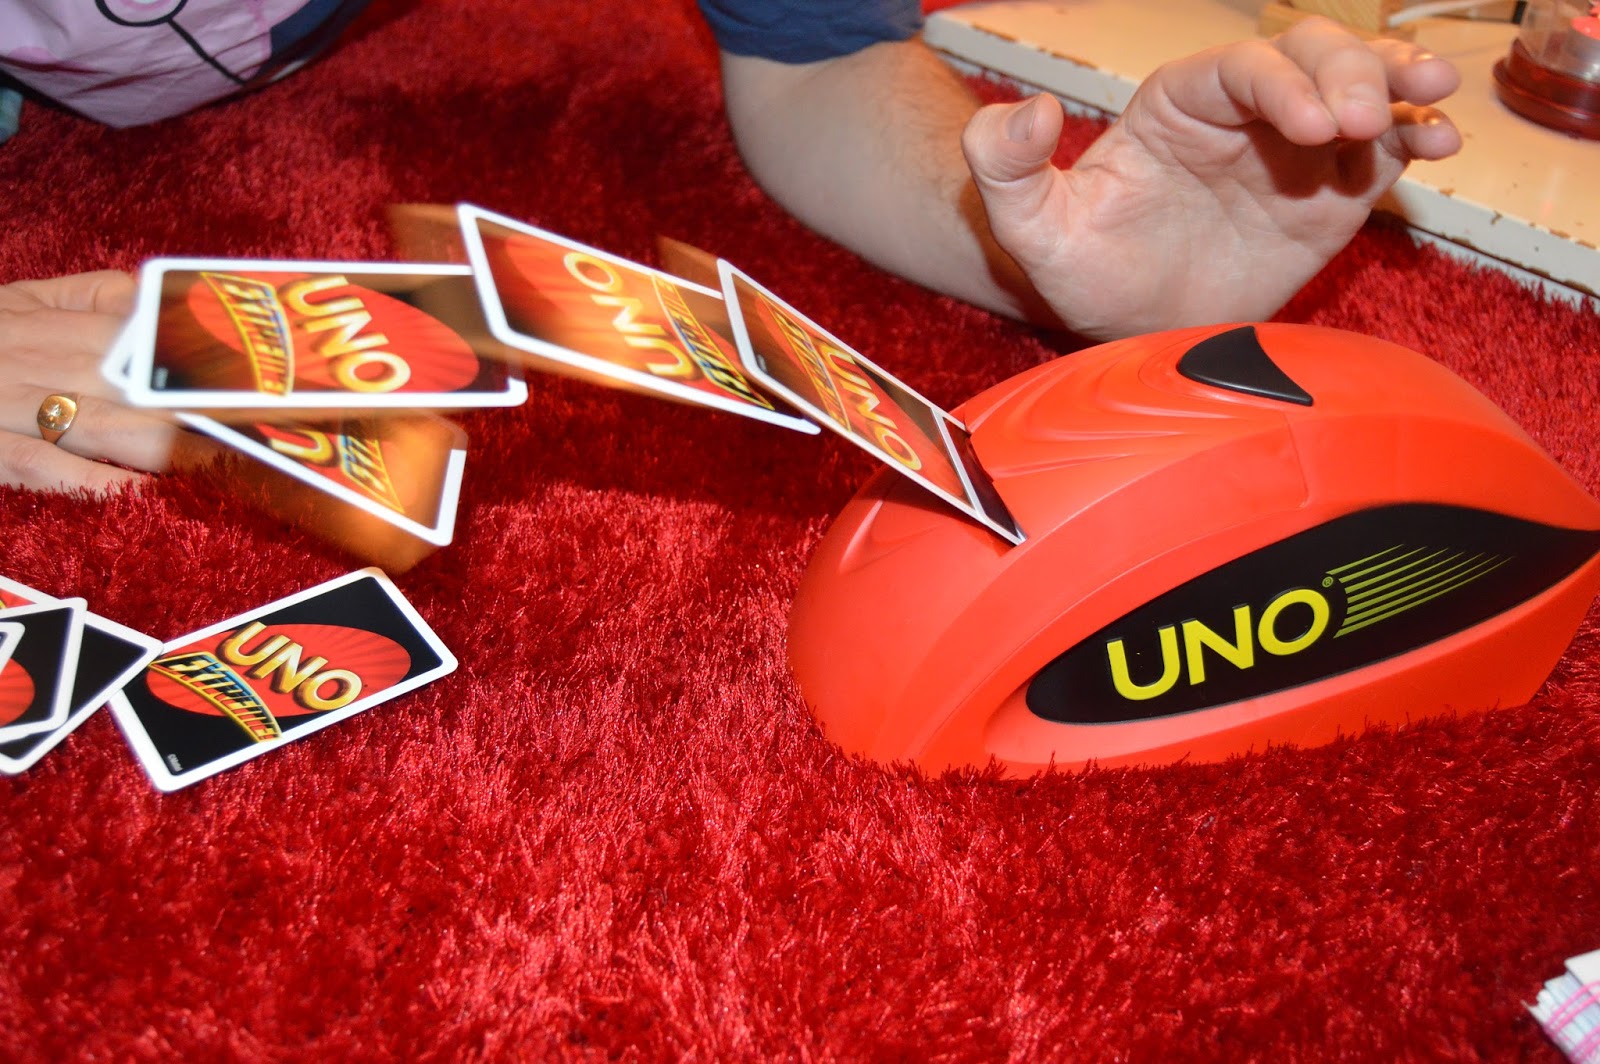 Playdays and Runways: UNO Extreme Review